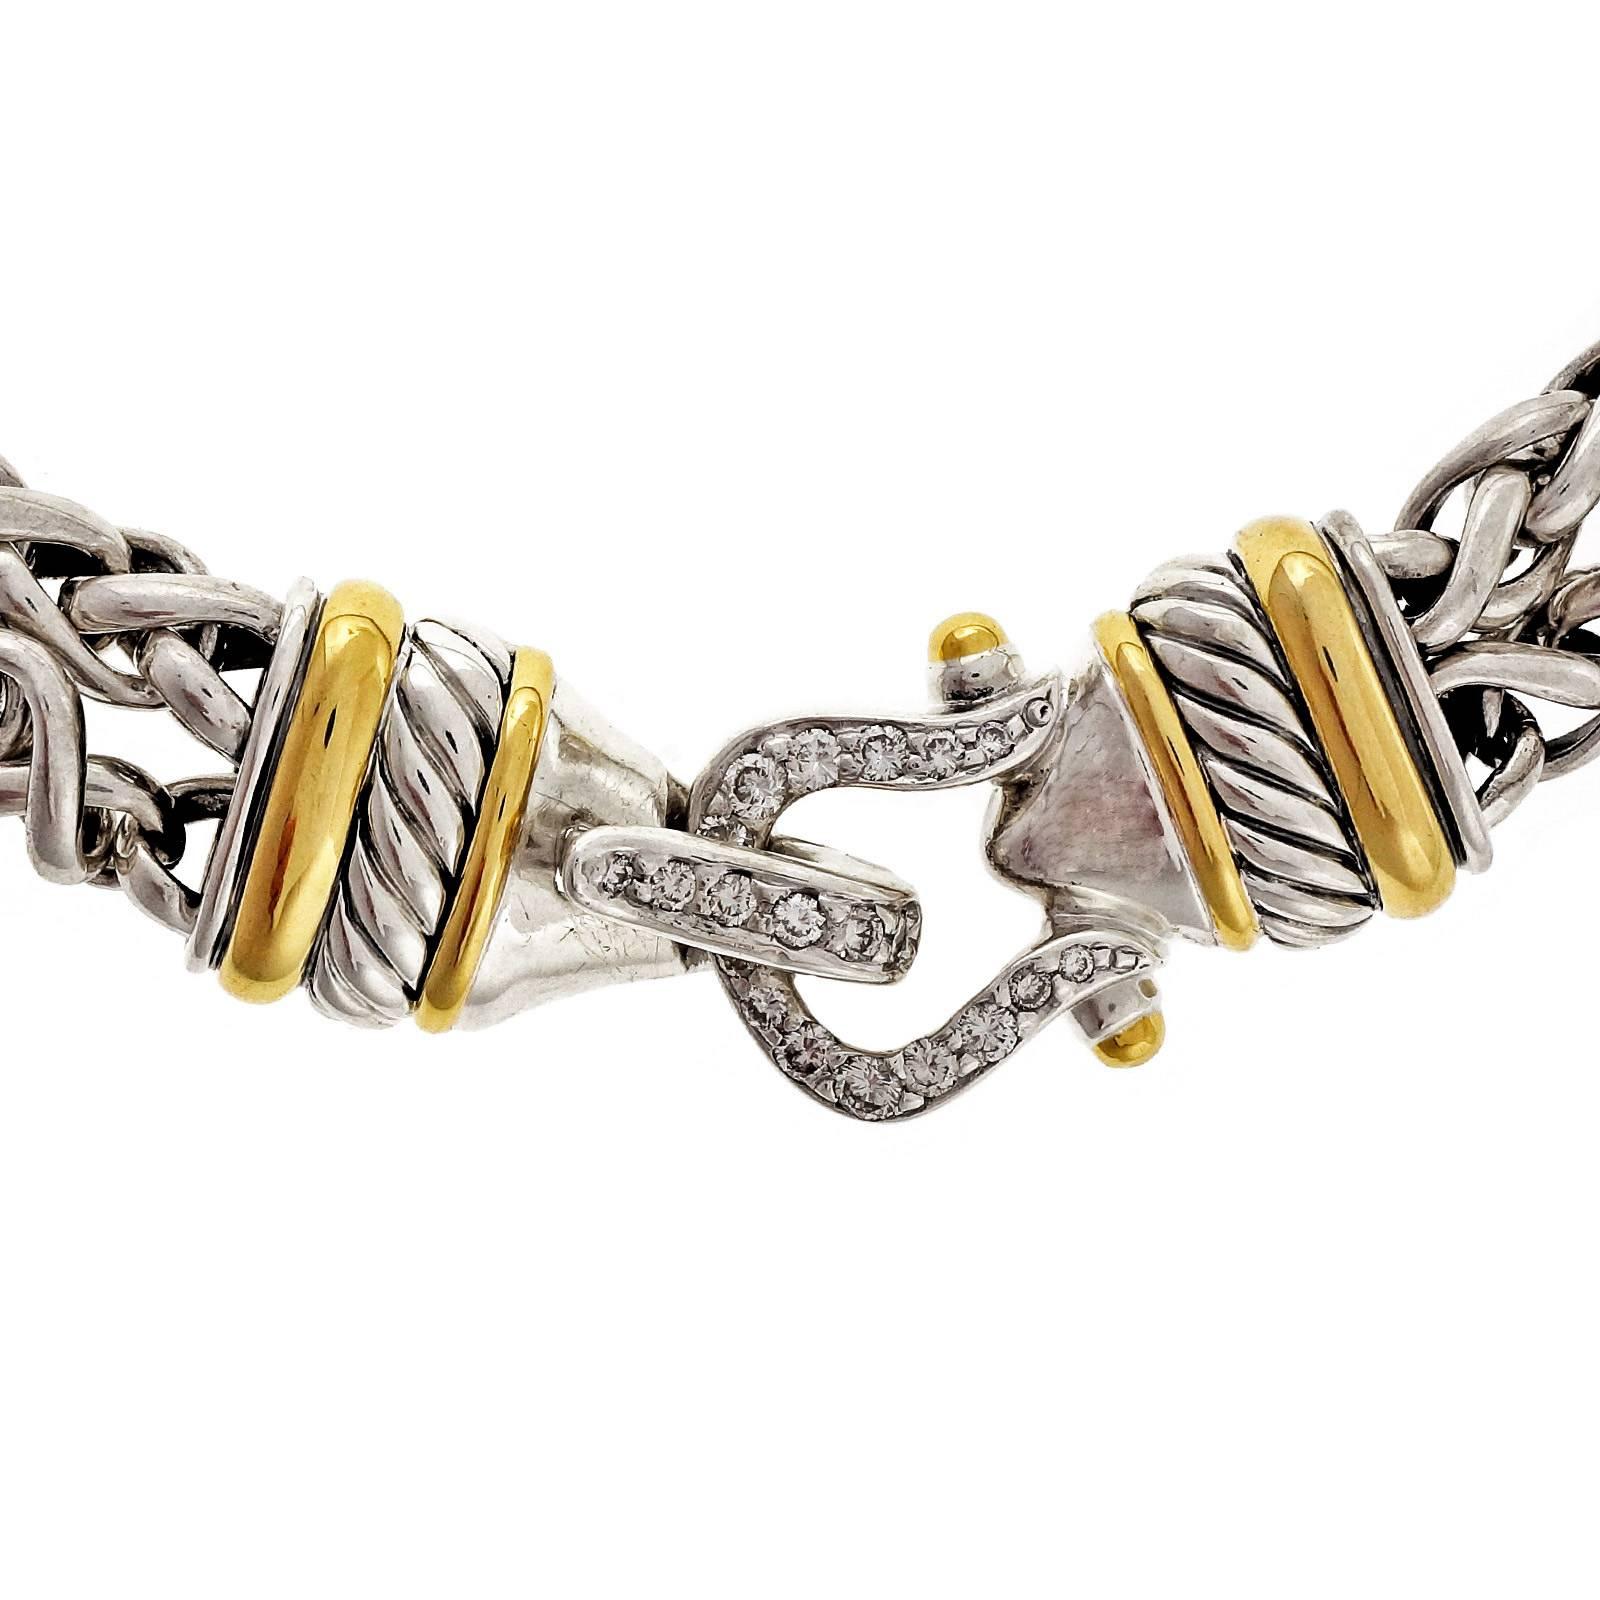 David Yurman diamond clasp silver & 18k yellow gold necklace. 2 rows 6mm wheat chain.

20 round diamonds approx. total weight .40cts, H, SI
925 silver and 18k yellow gold
Tested: 18k and silver
Stamped: 925 750
Hallmark: © D. Yurman
Length: